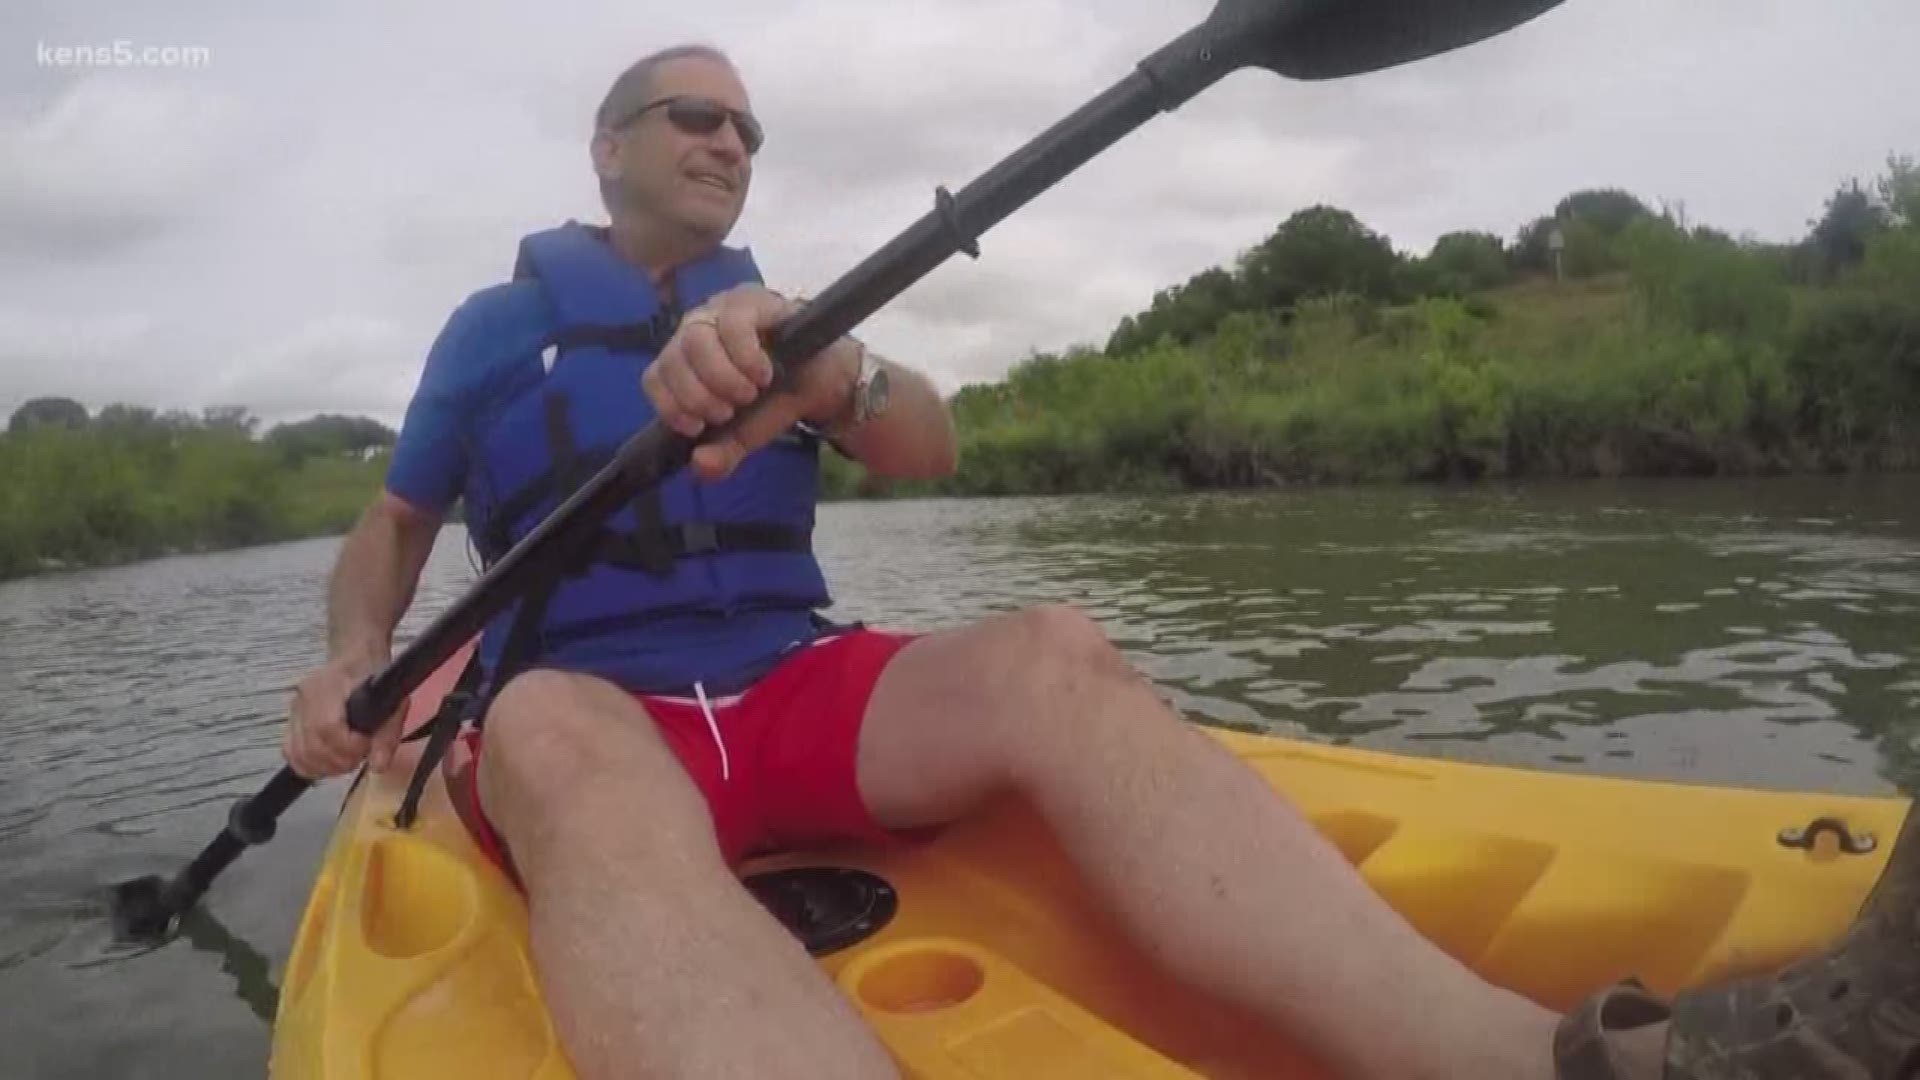 KENS 5's Barry Davis is kayaking the Mission Reach in this week's Texas Outdoors!